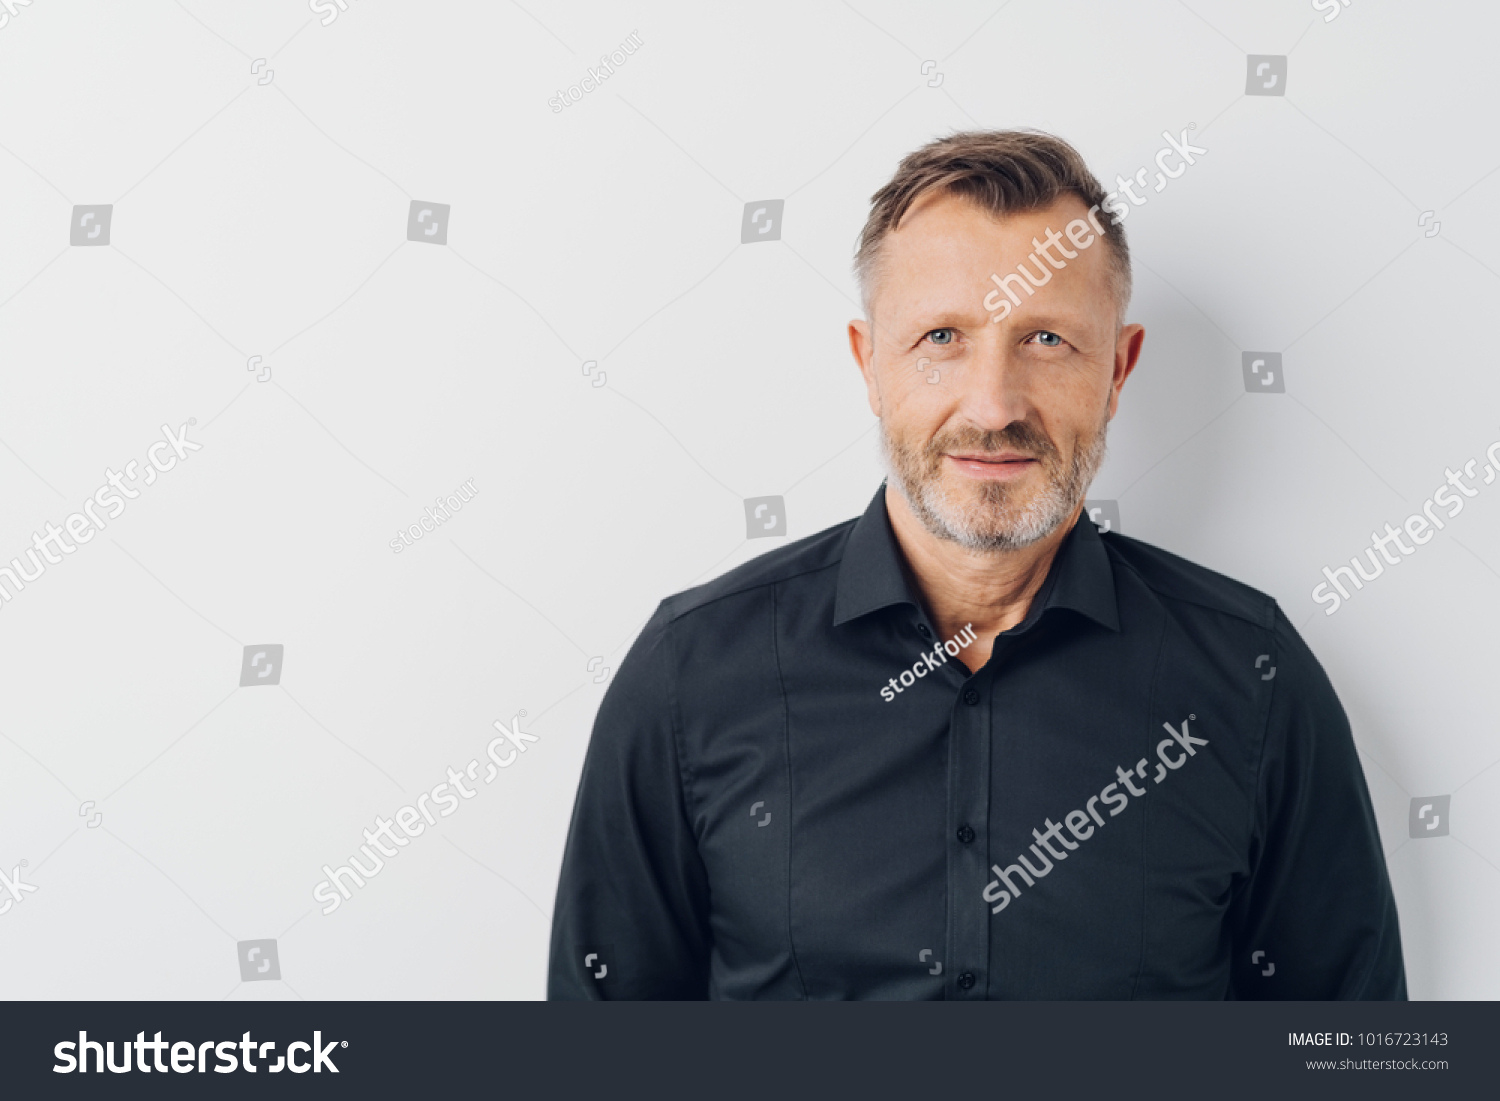 Head and shoulders portrait of a bearded middle-aged man looking thoughtfully at the camera over a white studio background with copy space